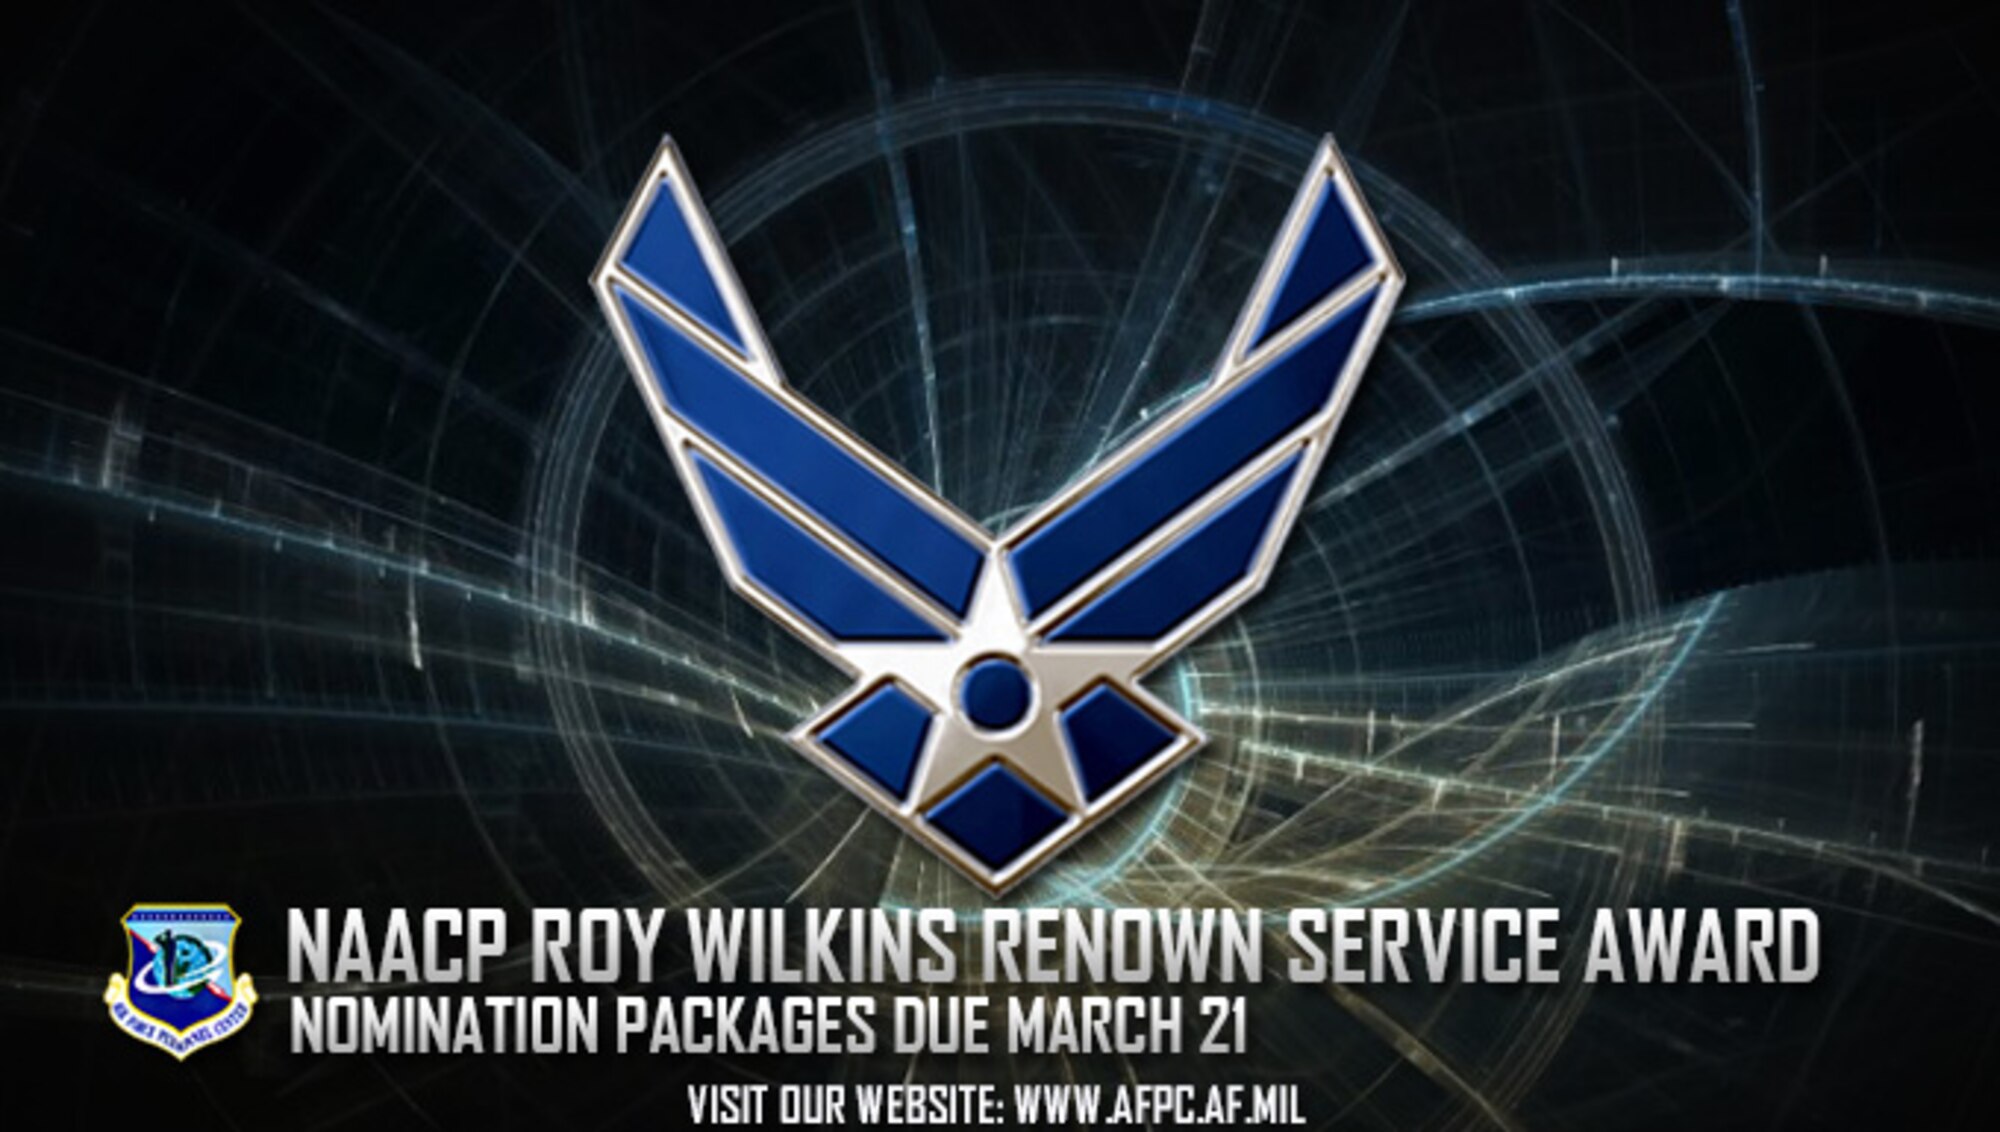 Nominations for the 2017 National Association for the Advancement of Colored People Roy Wilkins Renown Service Award are due to the Air Force Personnel Center by March 21. The award honors military members and Department of Defense civilian employees who have supported the DOD mission or overseas contingency operations, or whose attributes epitomize the qualities and core values of their respective military service. (U.S. Air Force graphic by Staff Sgt. Alexx Pons) 